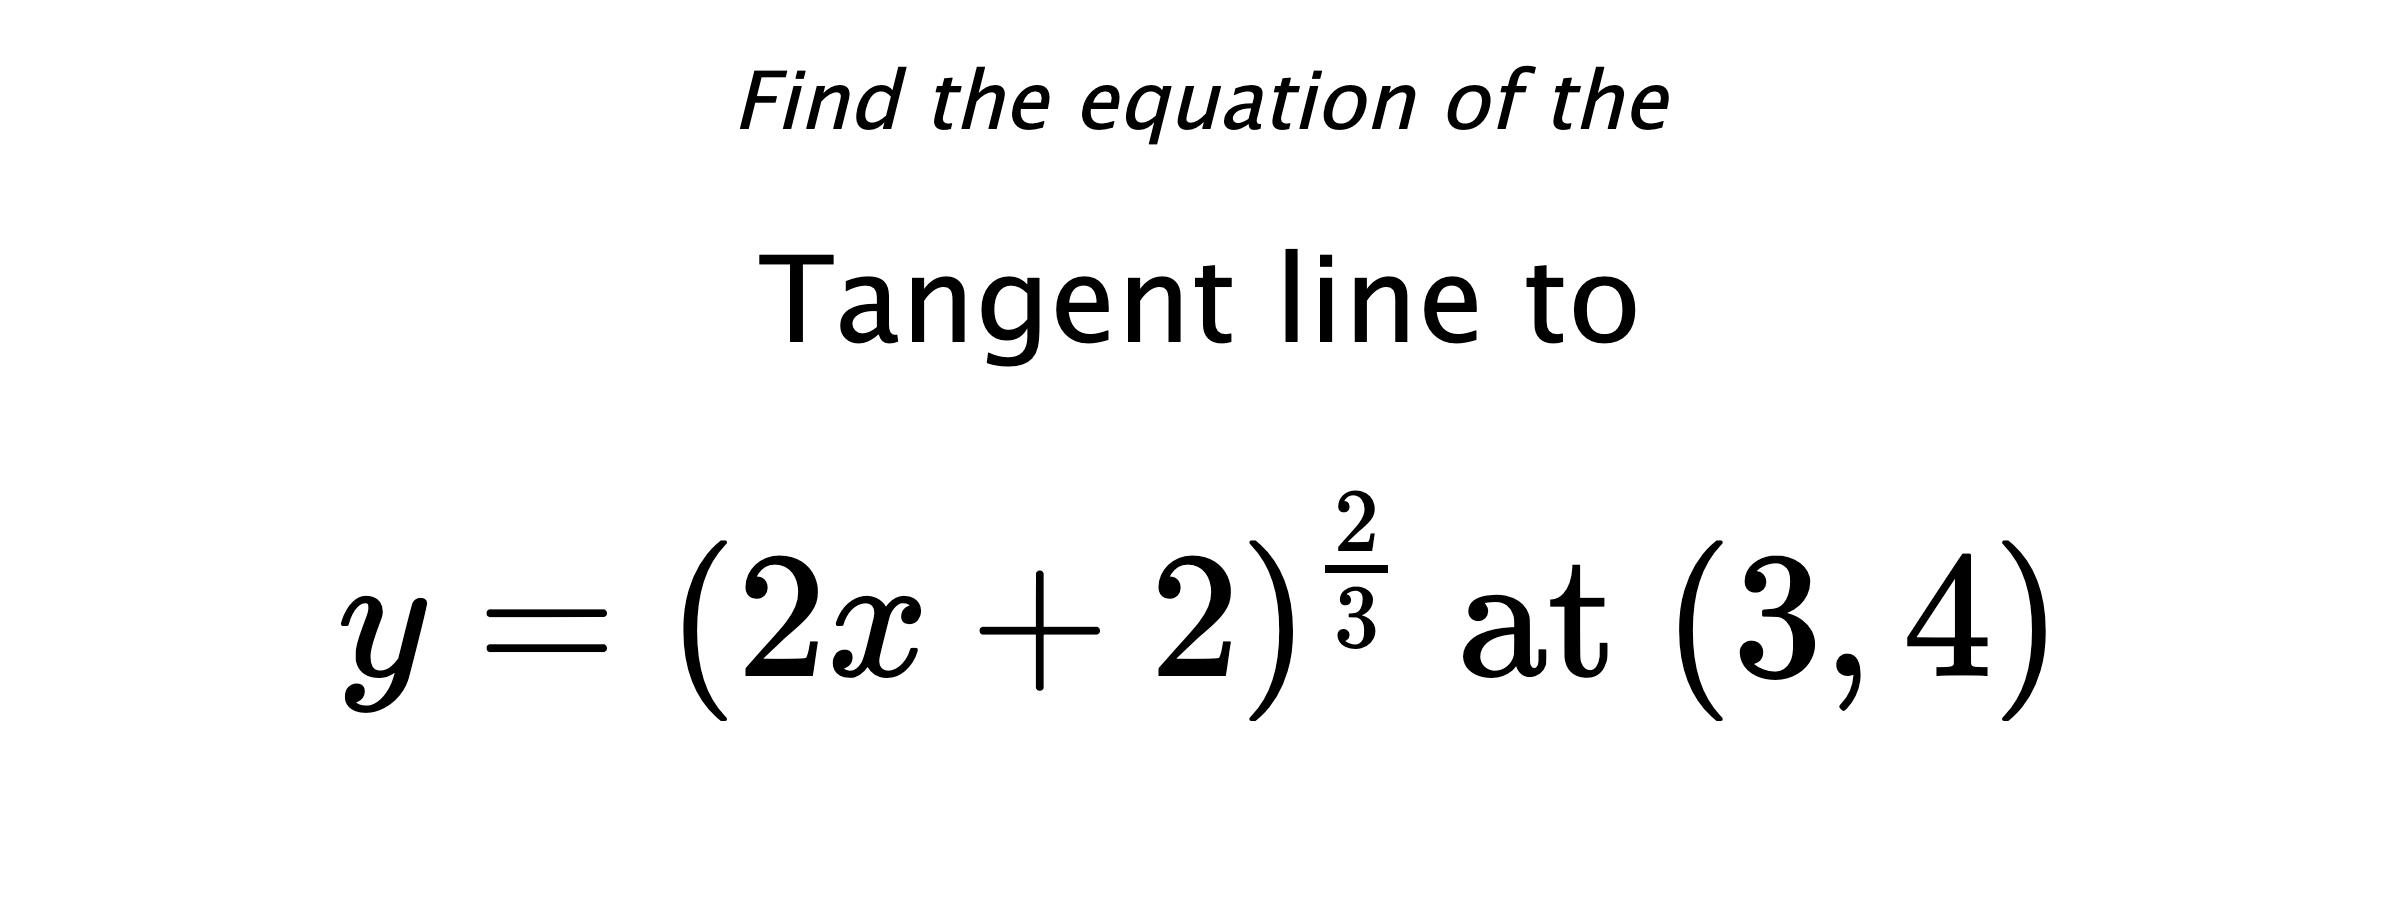 Find the equation of the Tangent line to $$ y=(2x+2)^{\frac{2}{3}} \text{ at } (3,4) $$